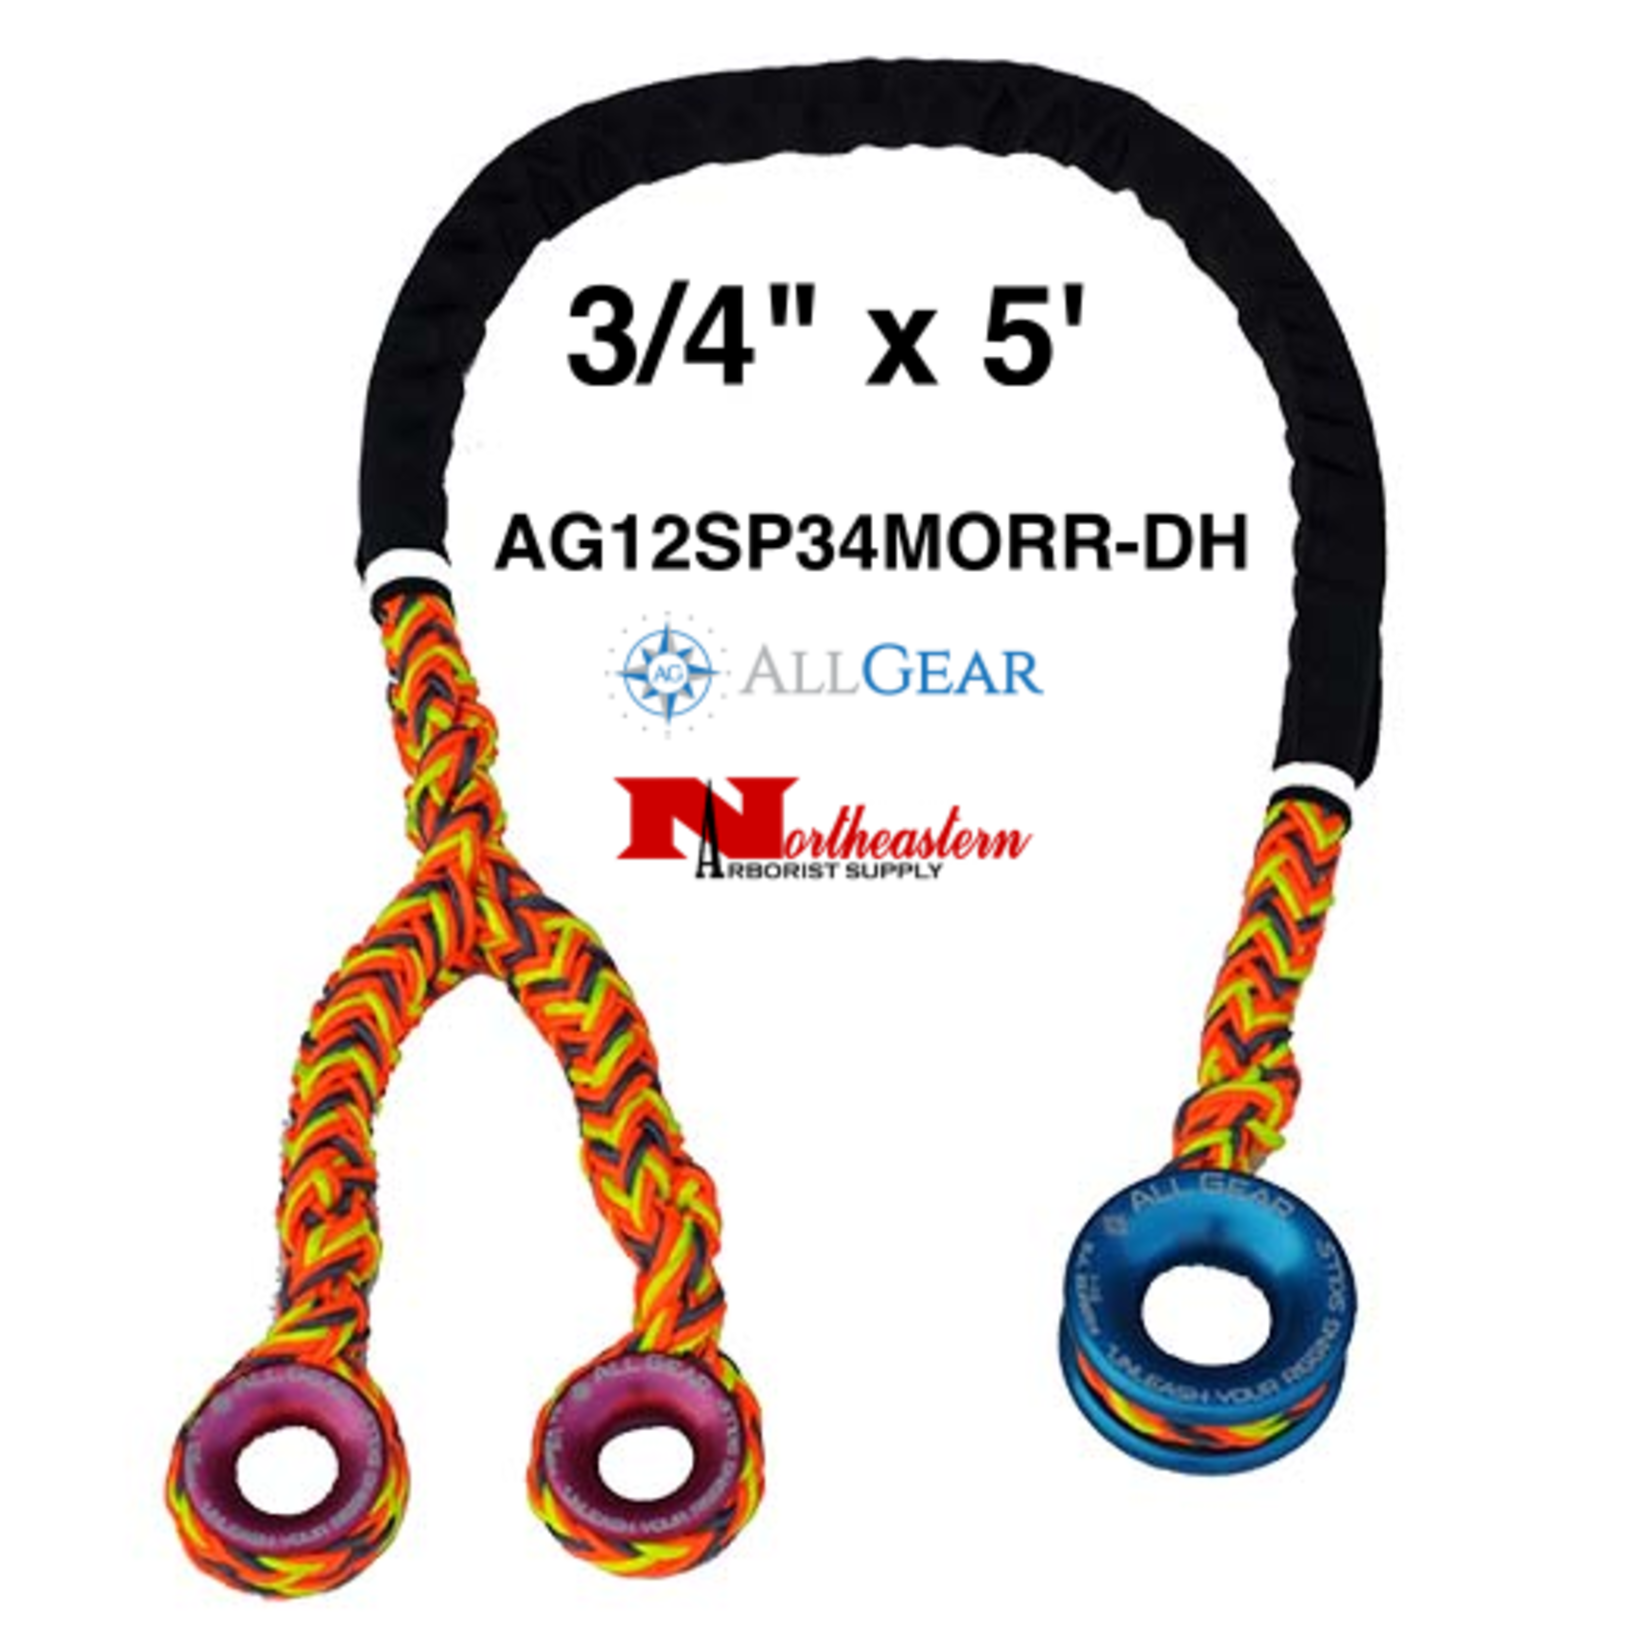 All Gear Inc. Sling, Ring To Ring with Double Head, 3/4" x 5'